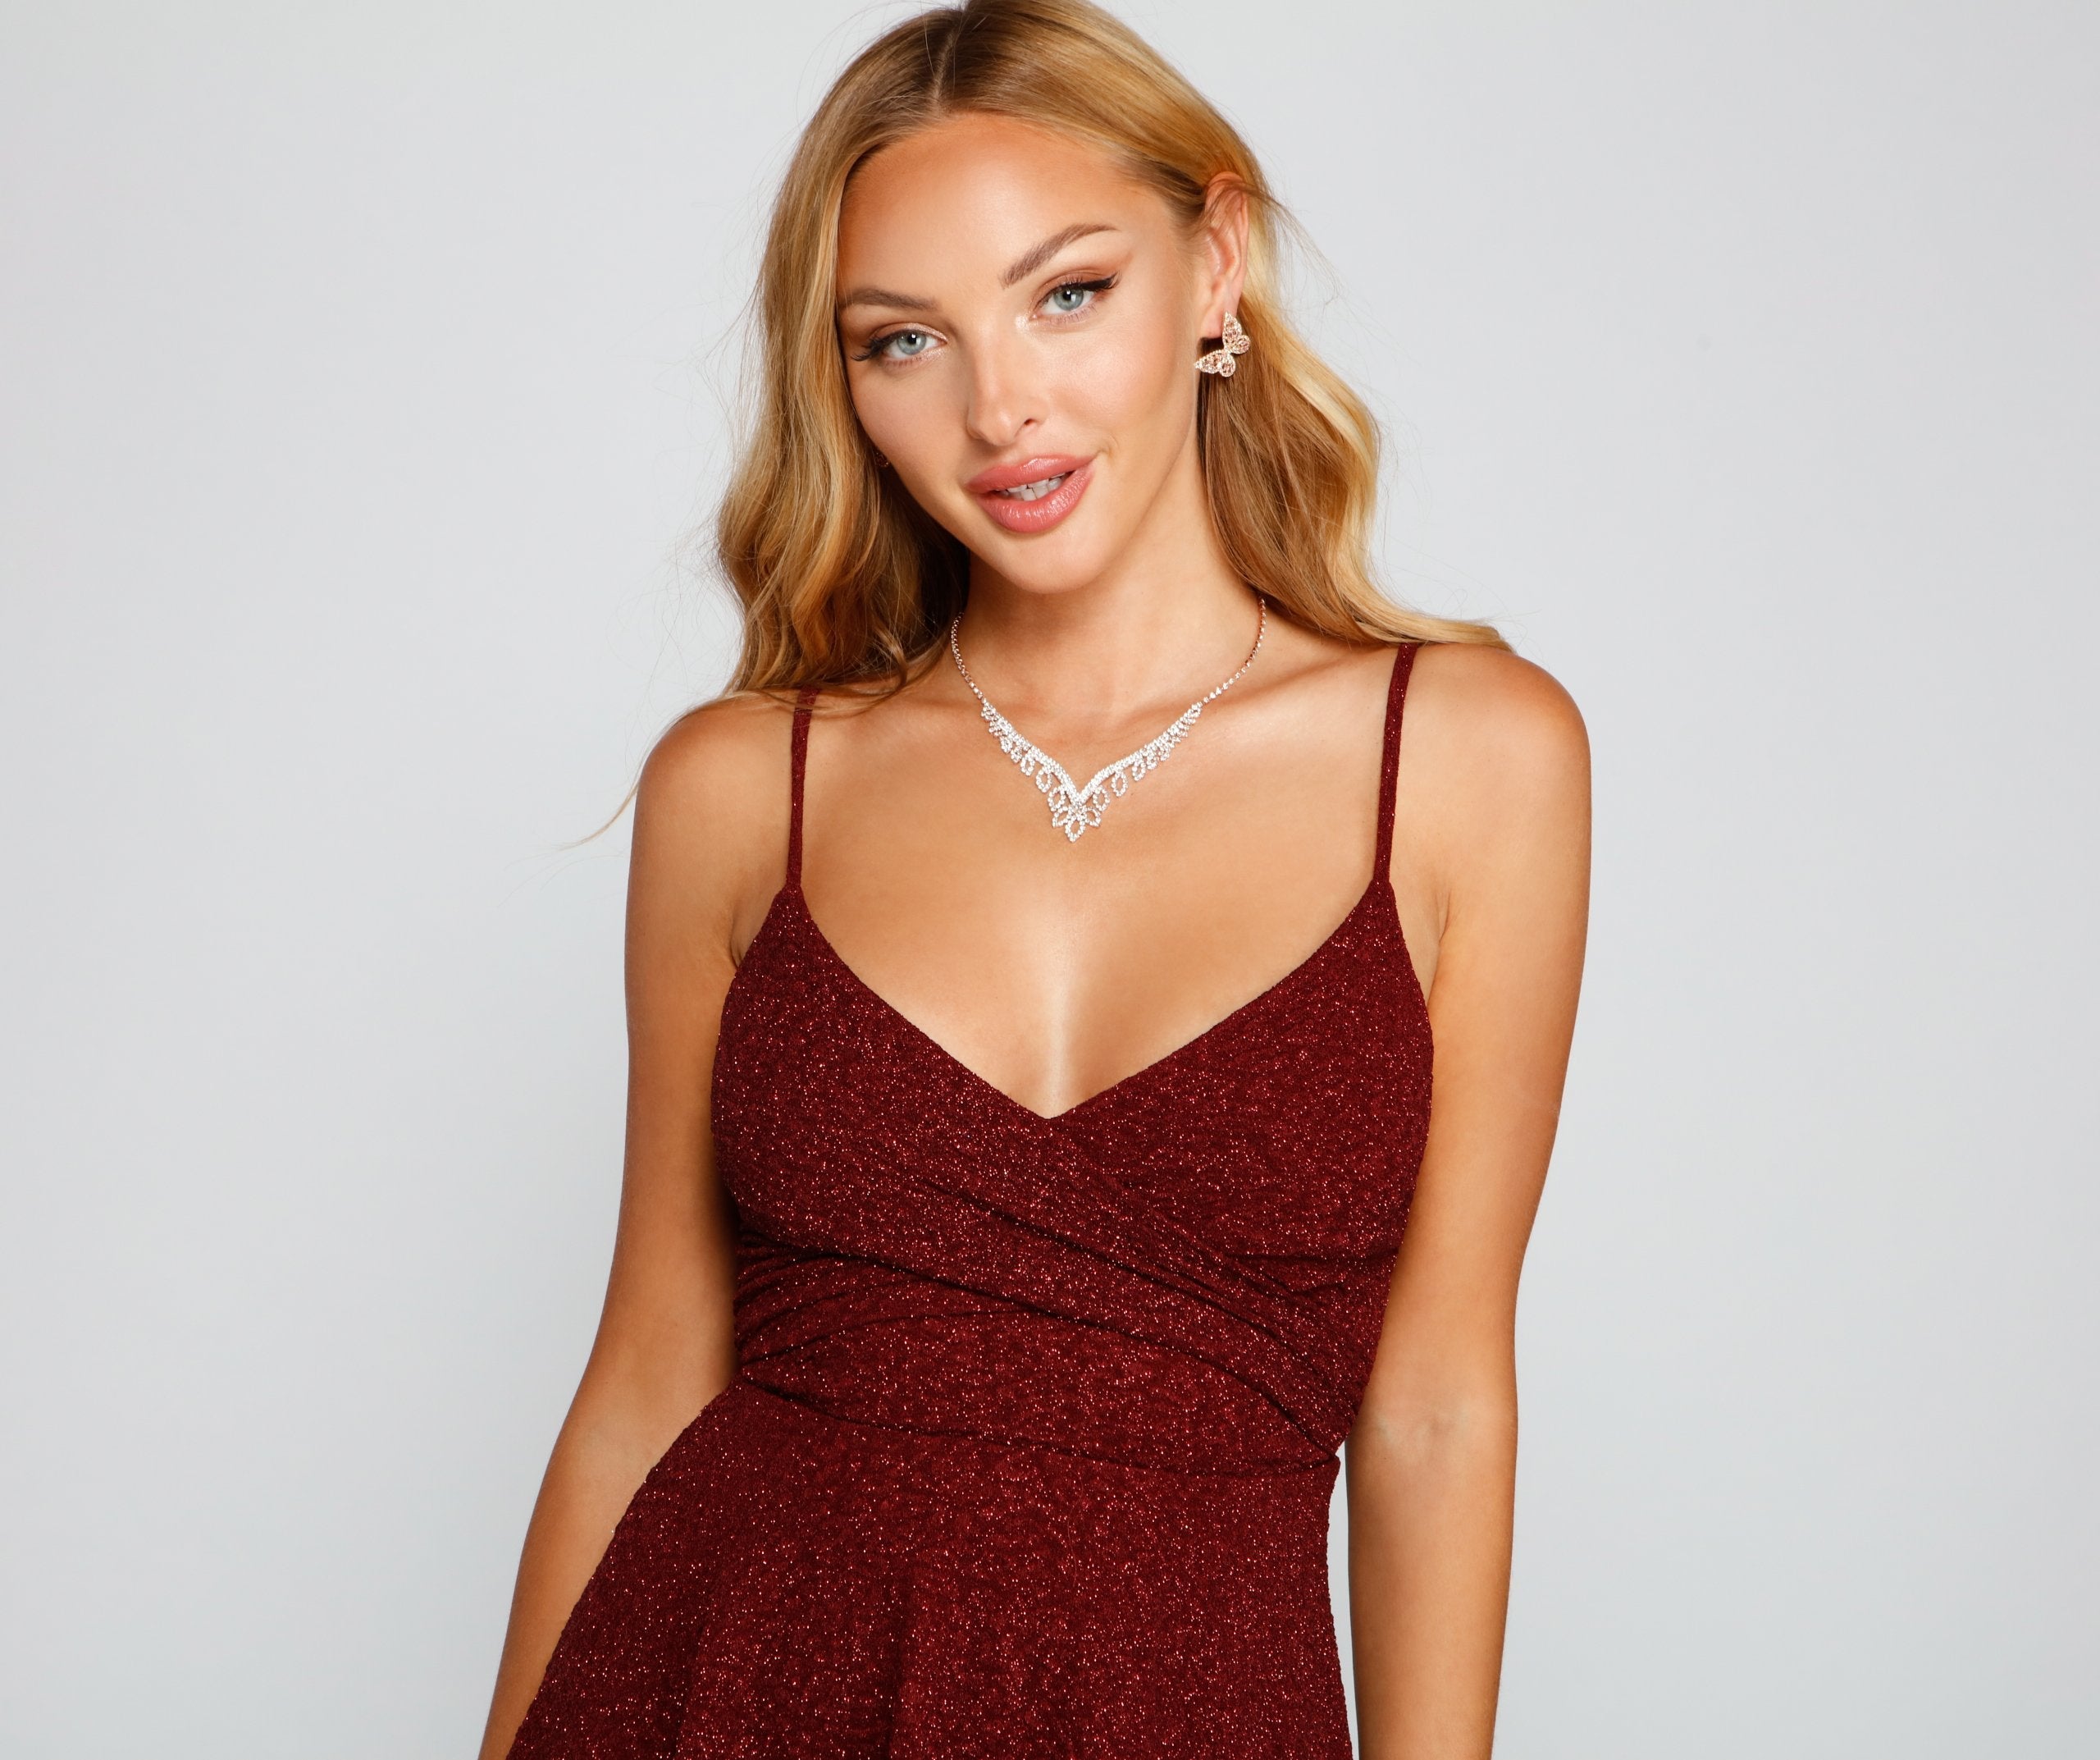 Twirl And Glow Glitter Skater Dress - Lady Occasions